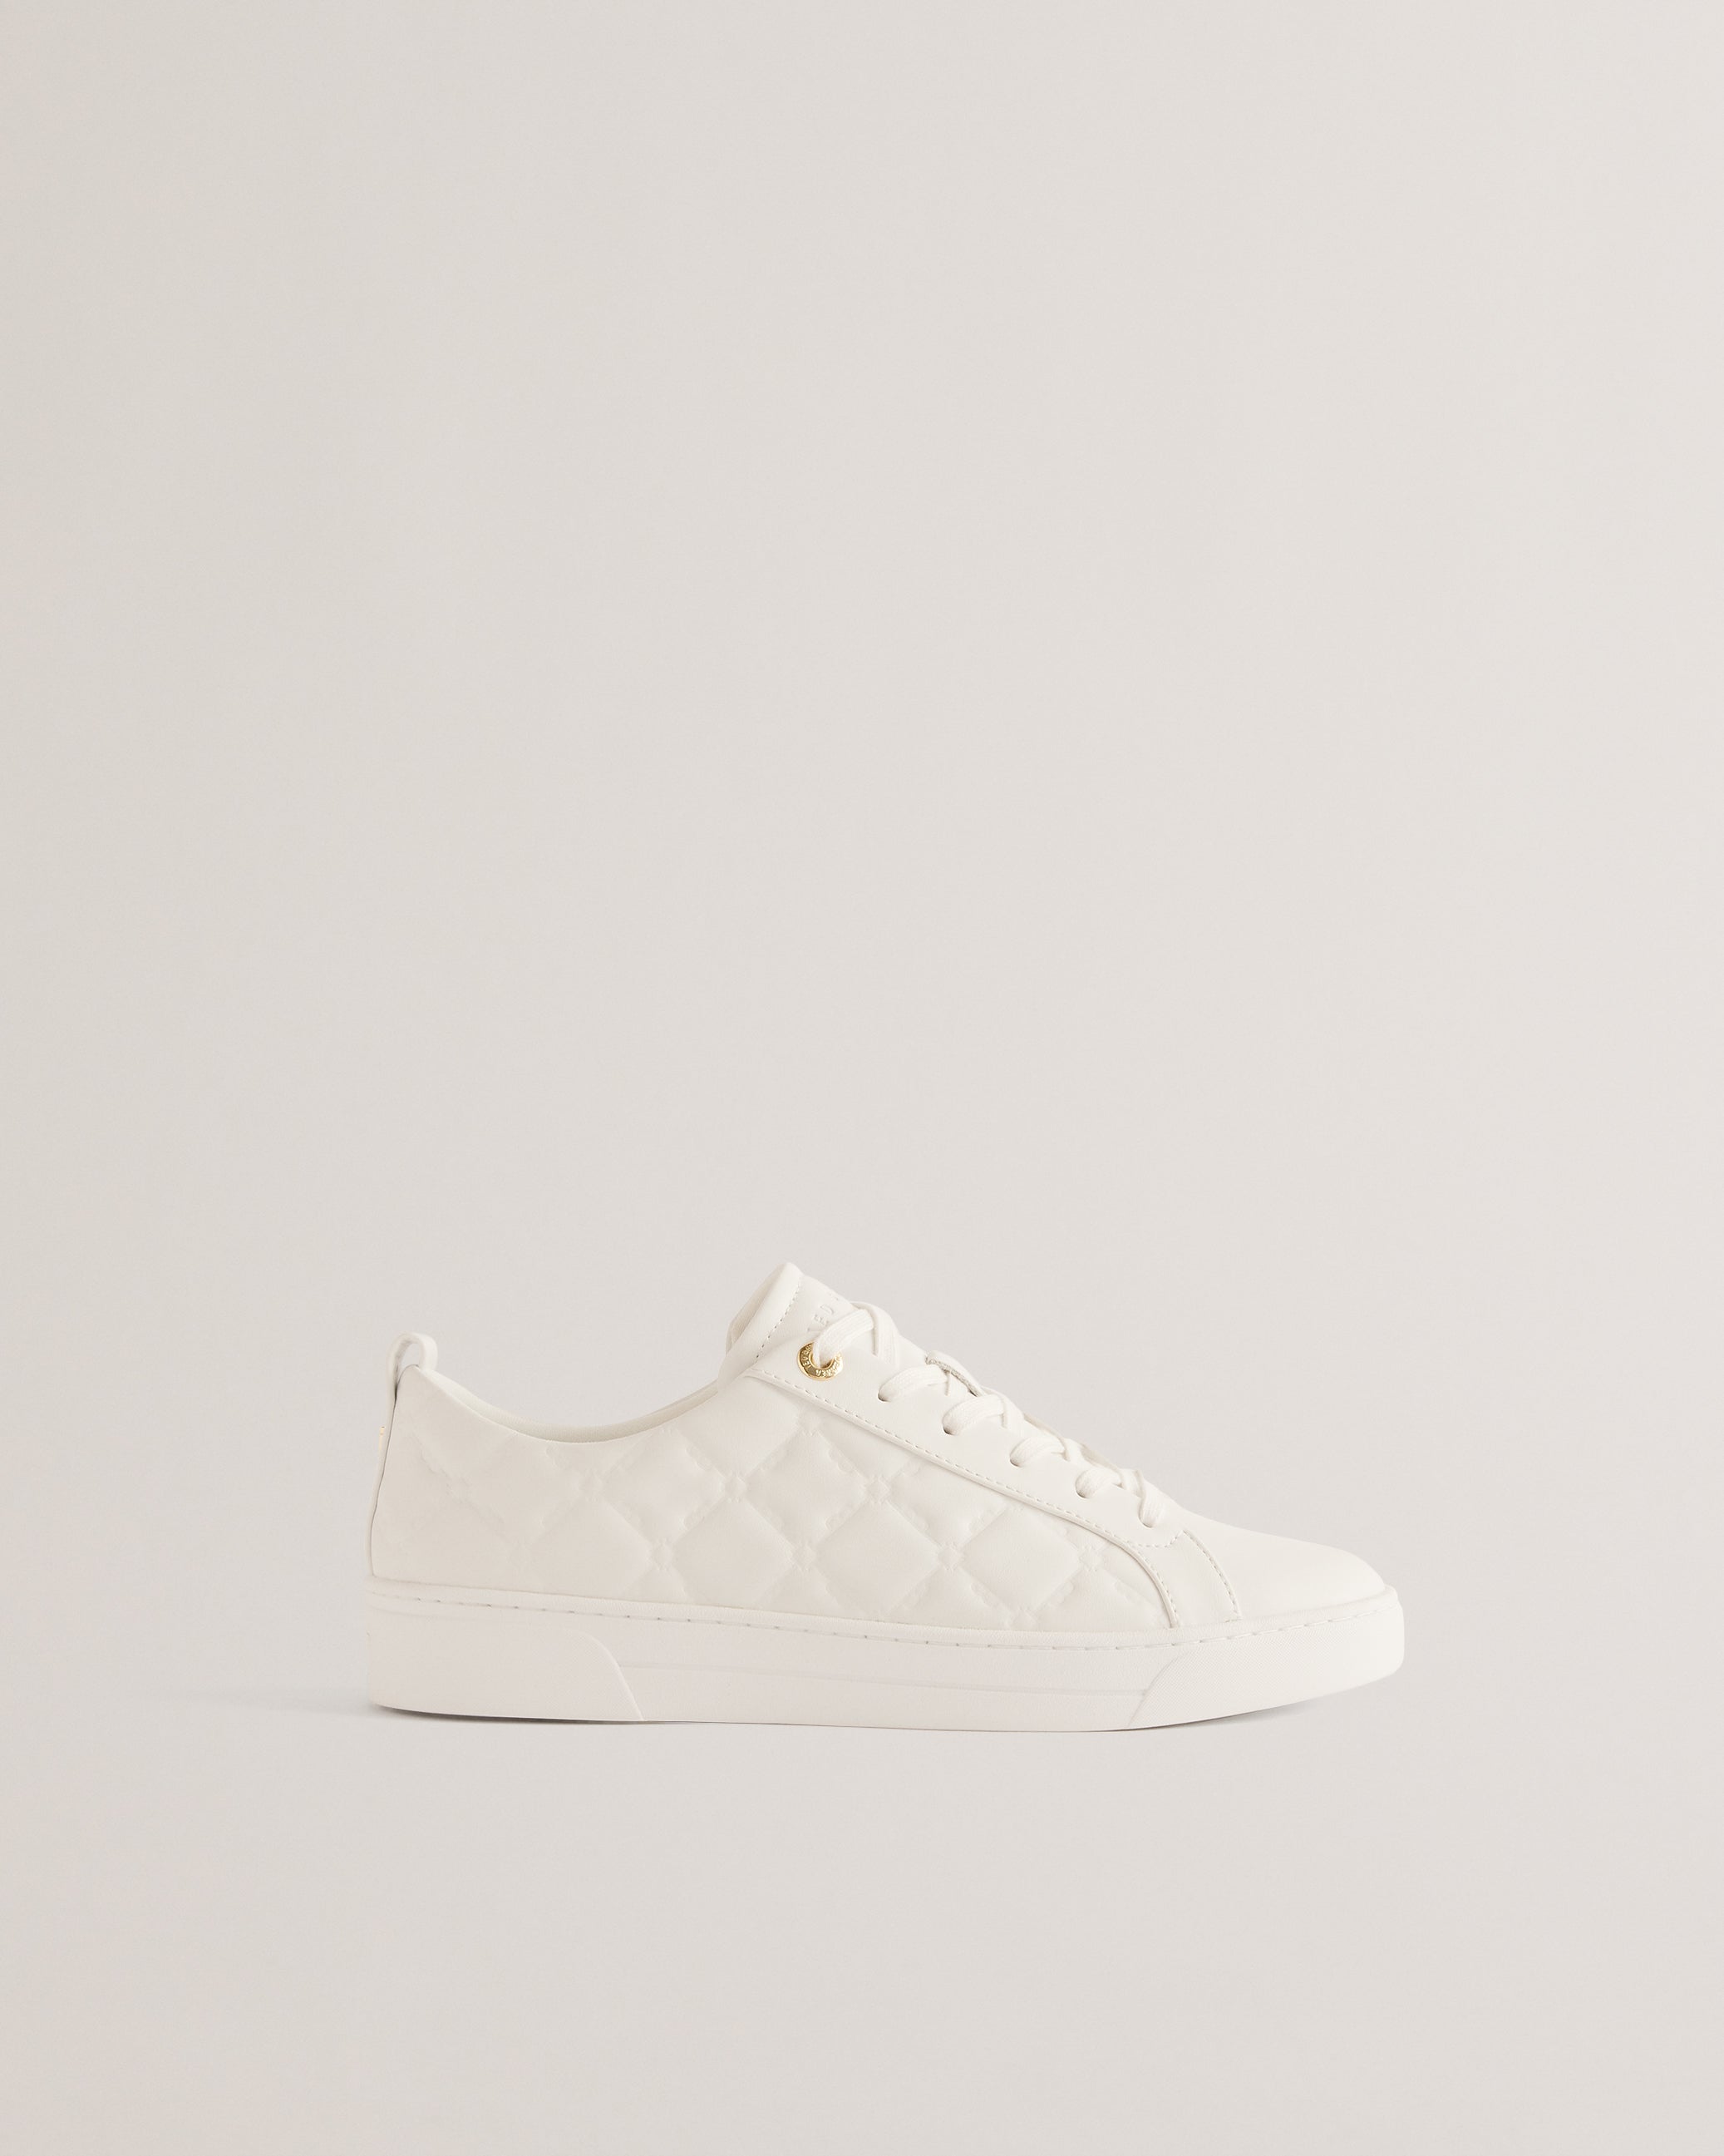 Maddisn Debossed Pattern Leather Trainers White